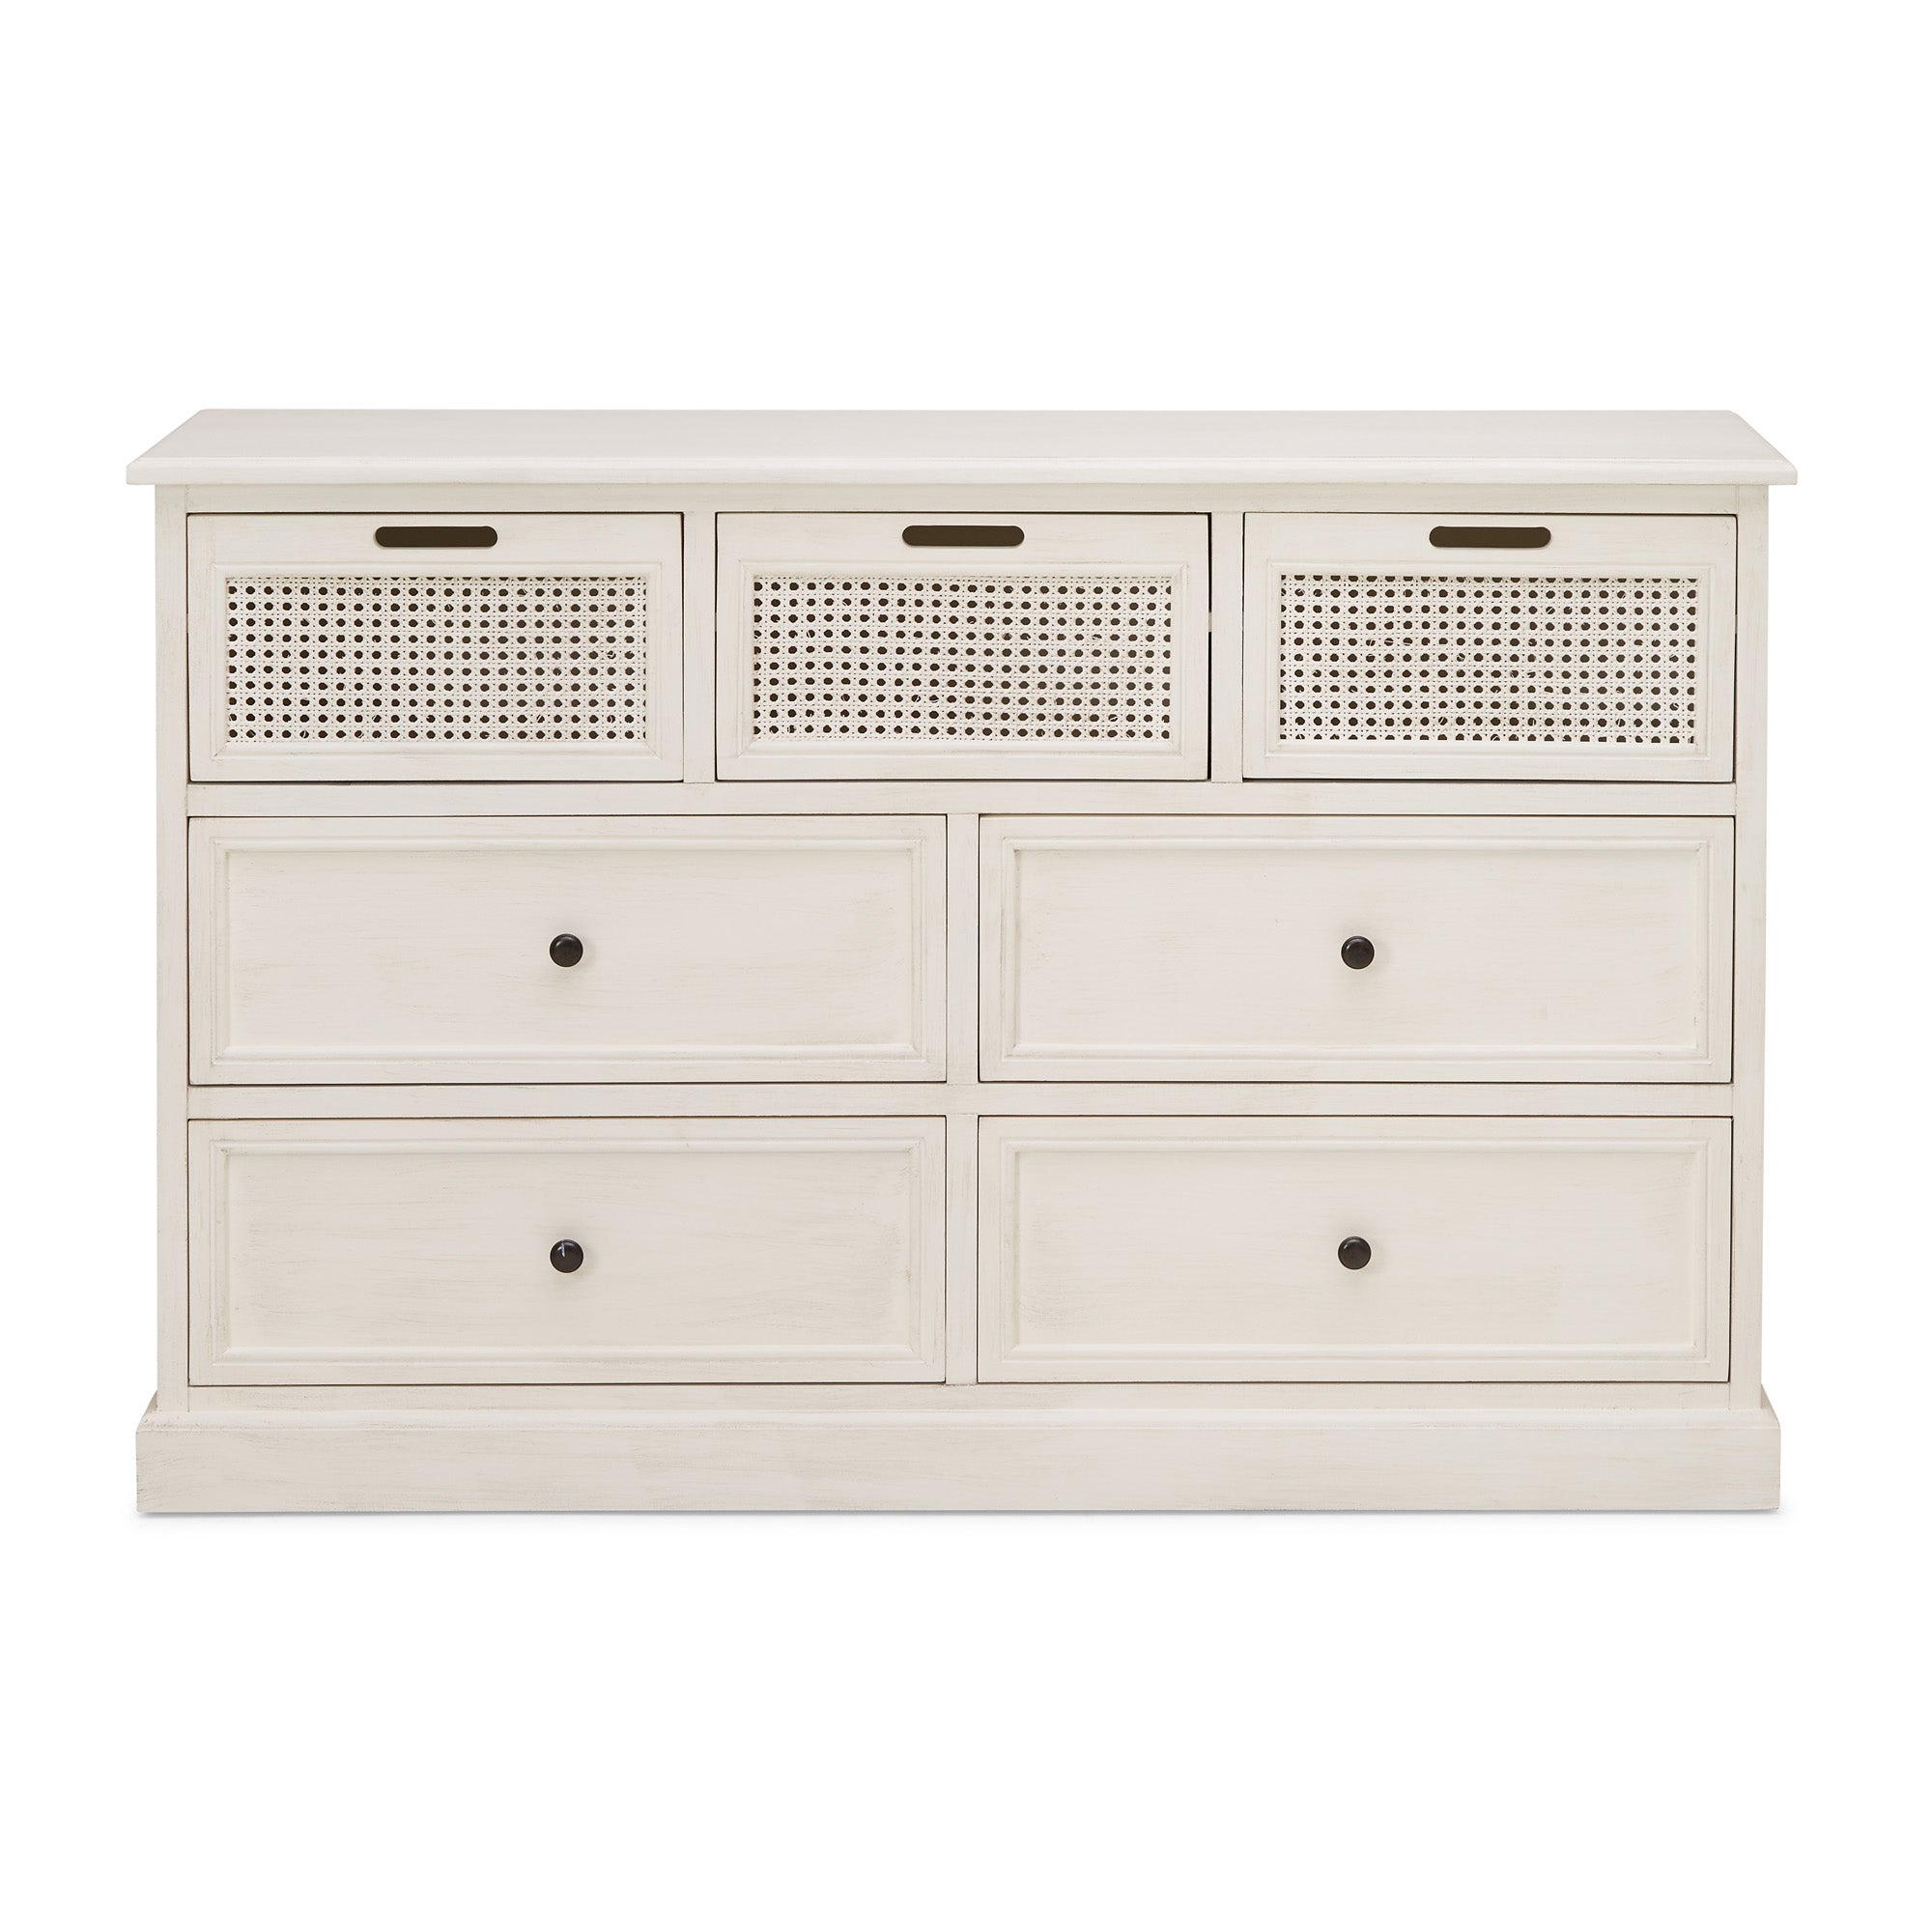 Lucy Cane 7 Drawer Chest White